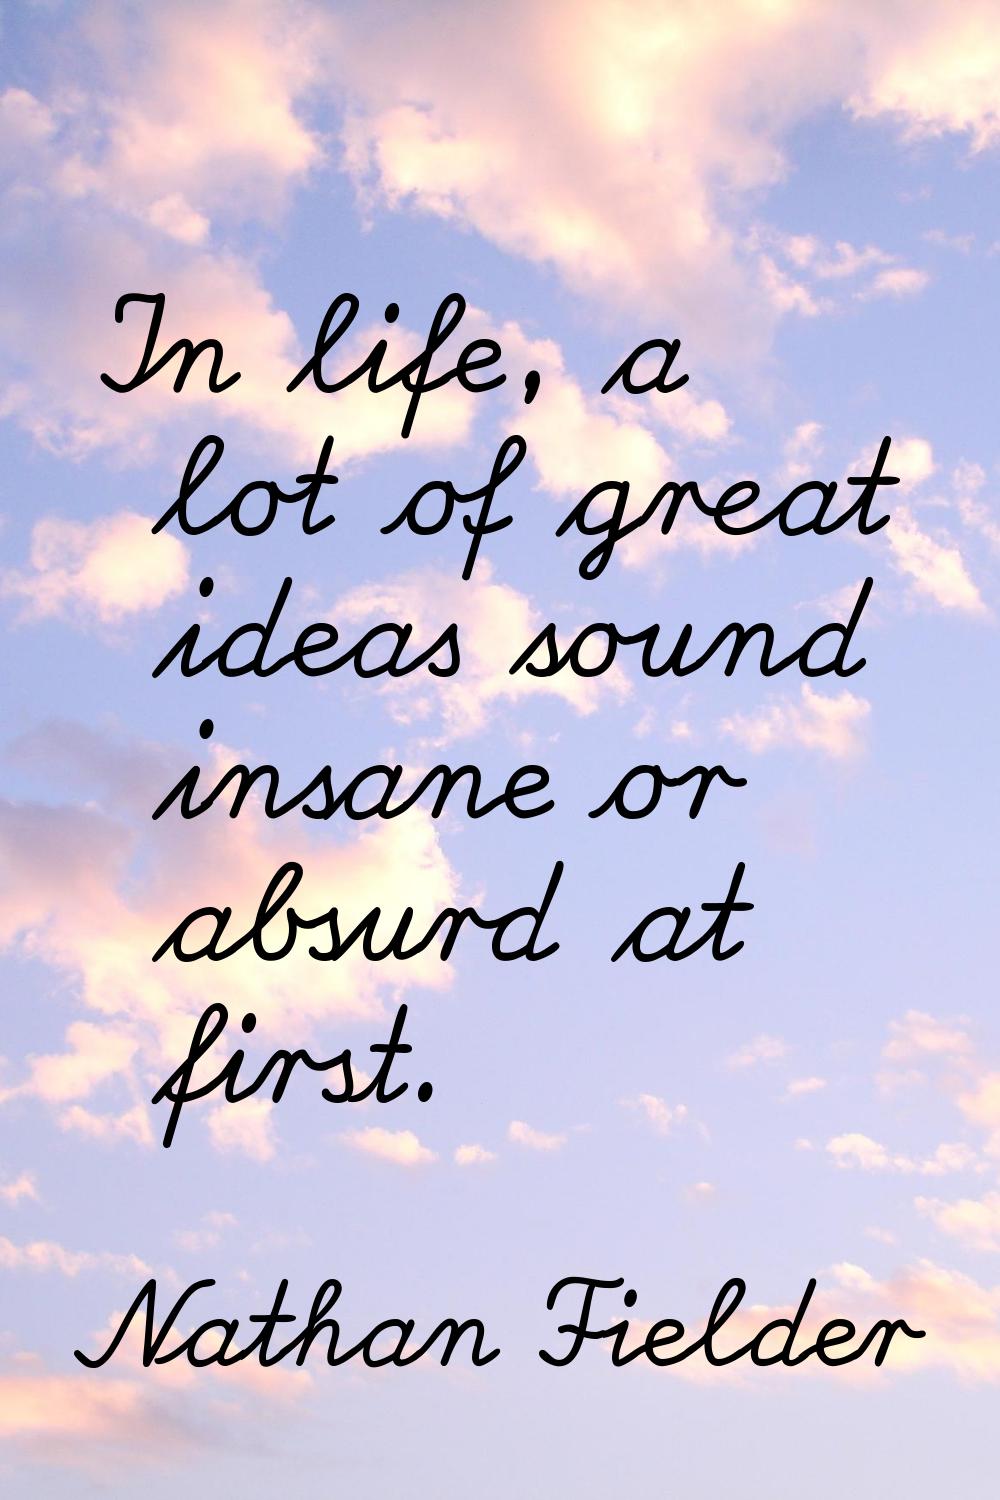 In life, a lot of great ideas sound insane or absurd at first.